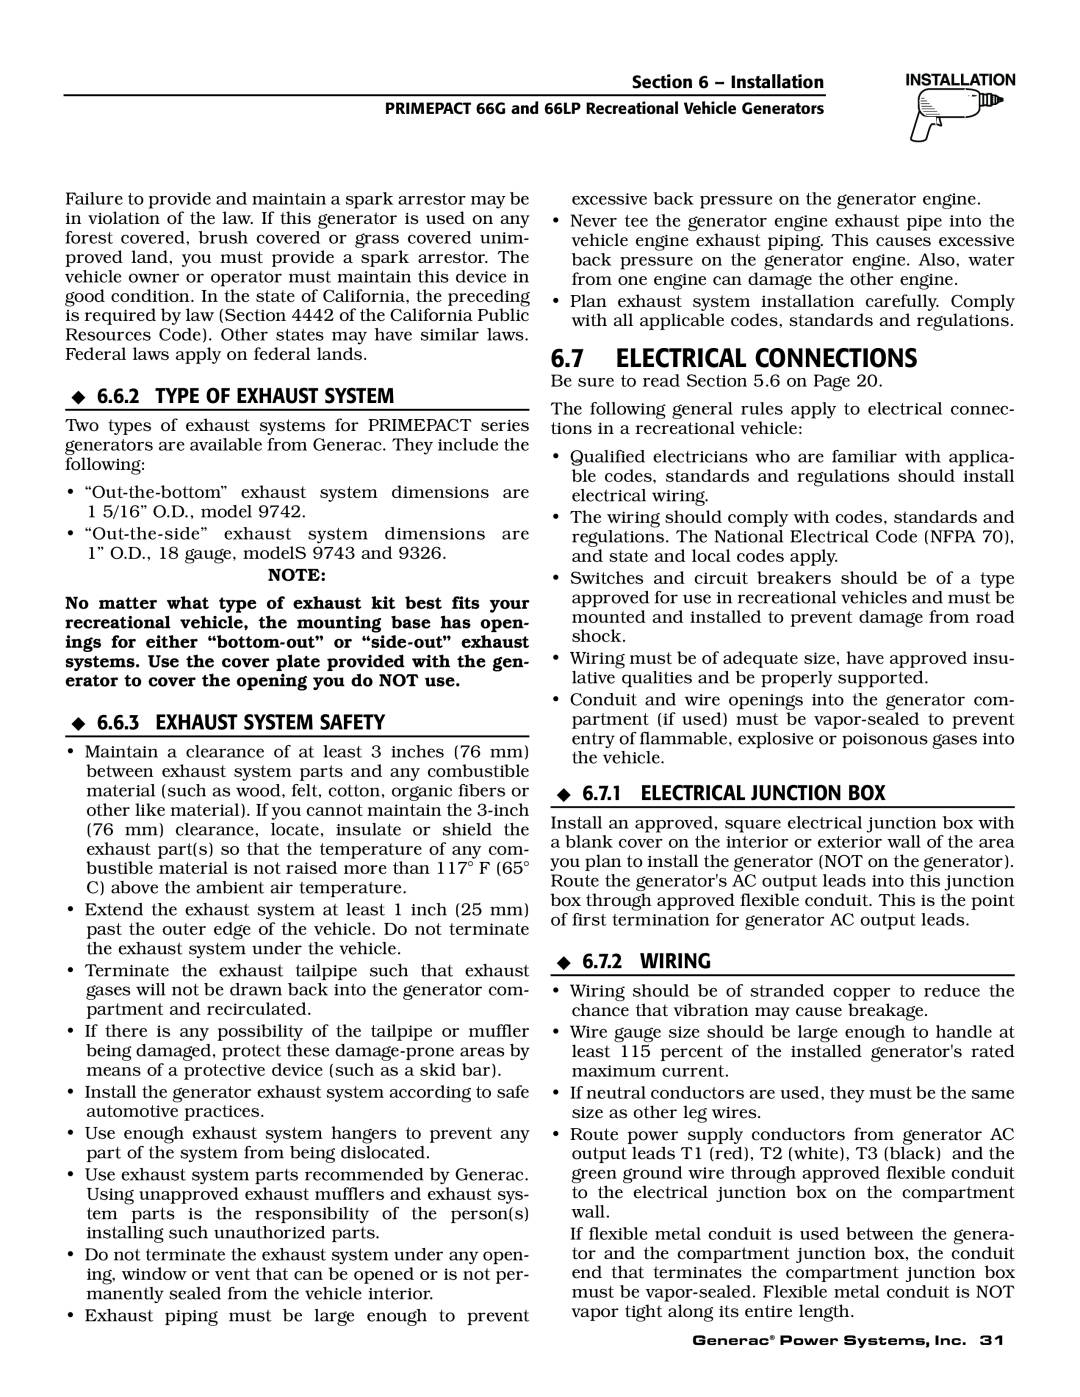 Generac Power Systems 009600-5, 009734-5 6.7ELECTRICAL CONNECTIONS, Type Of Exhaust System, Exhaust System Safety, Wiring 